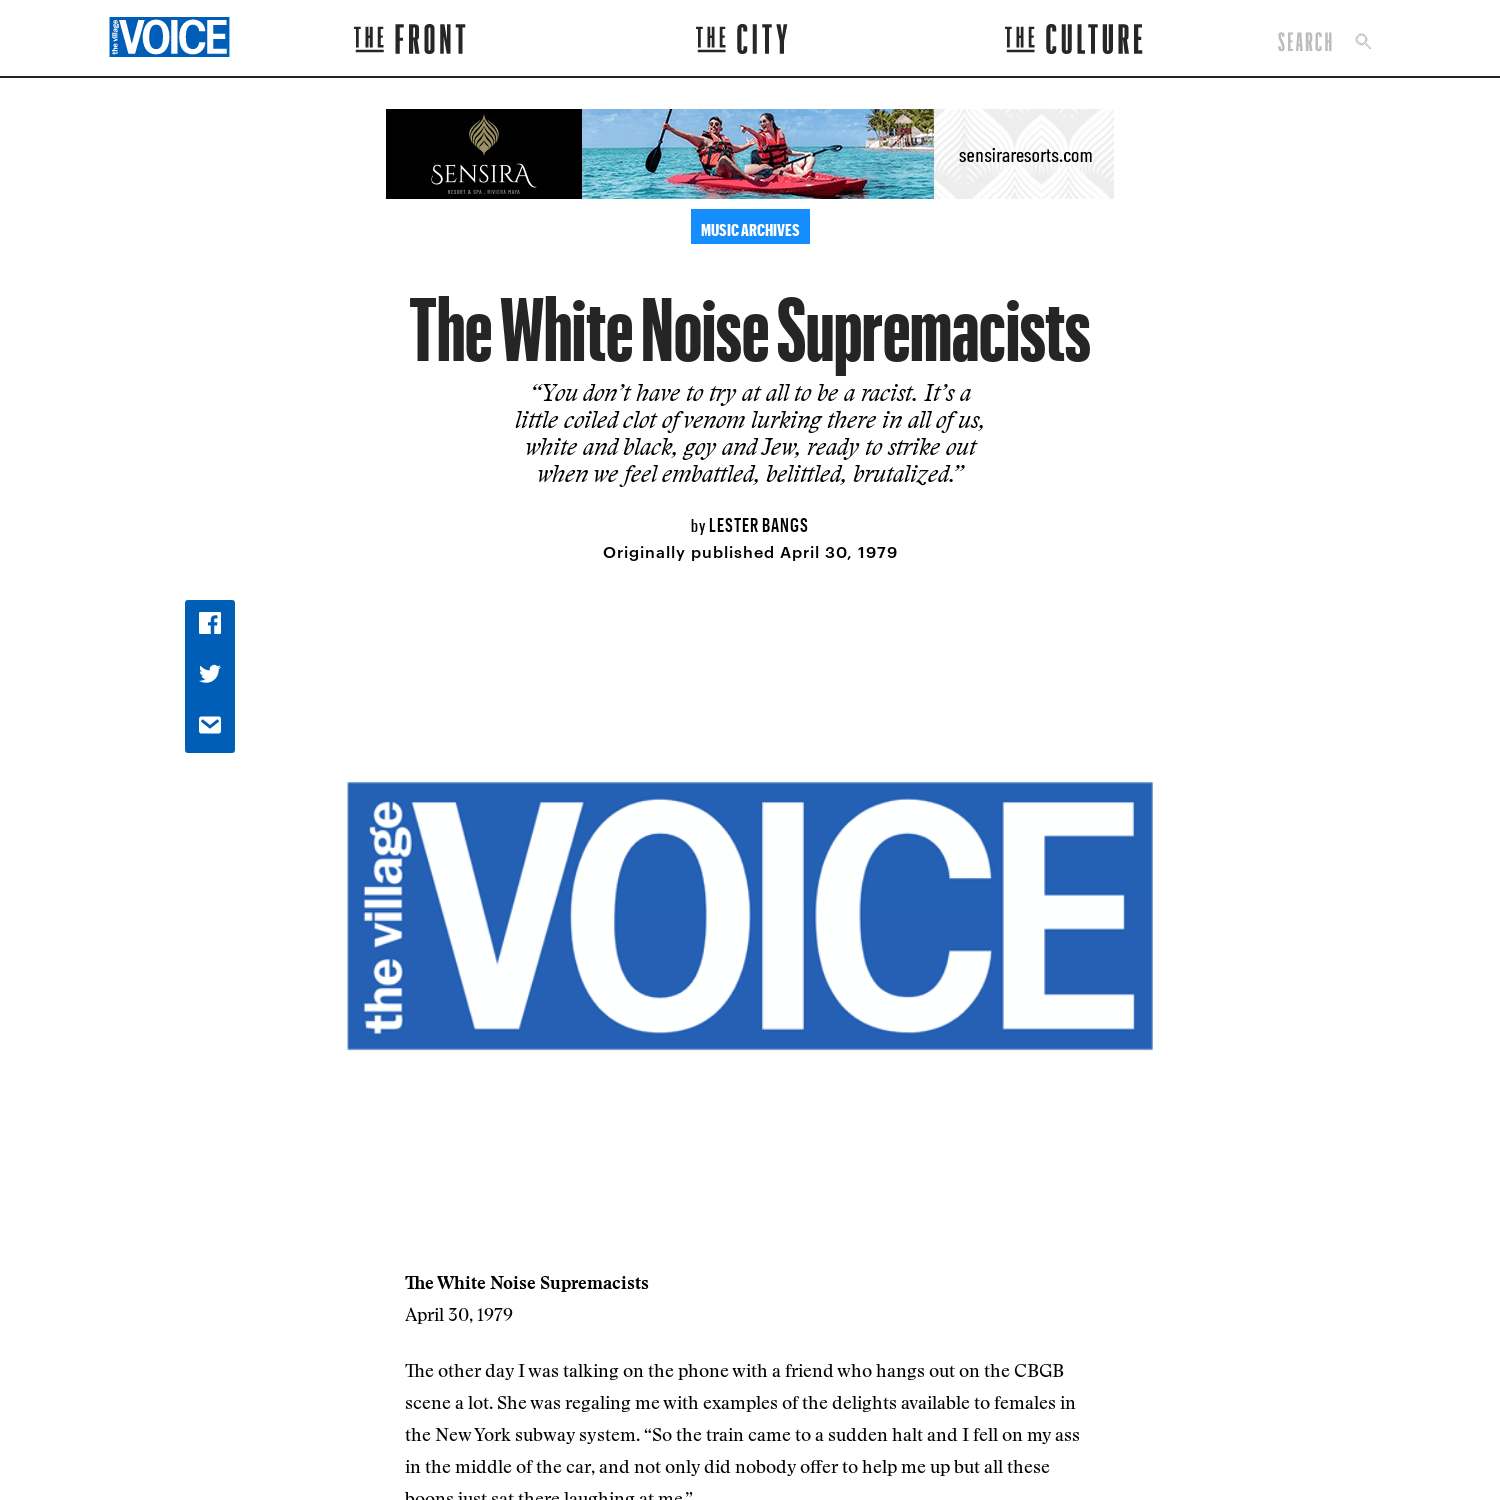 The White Noise Supremacists